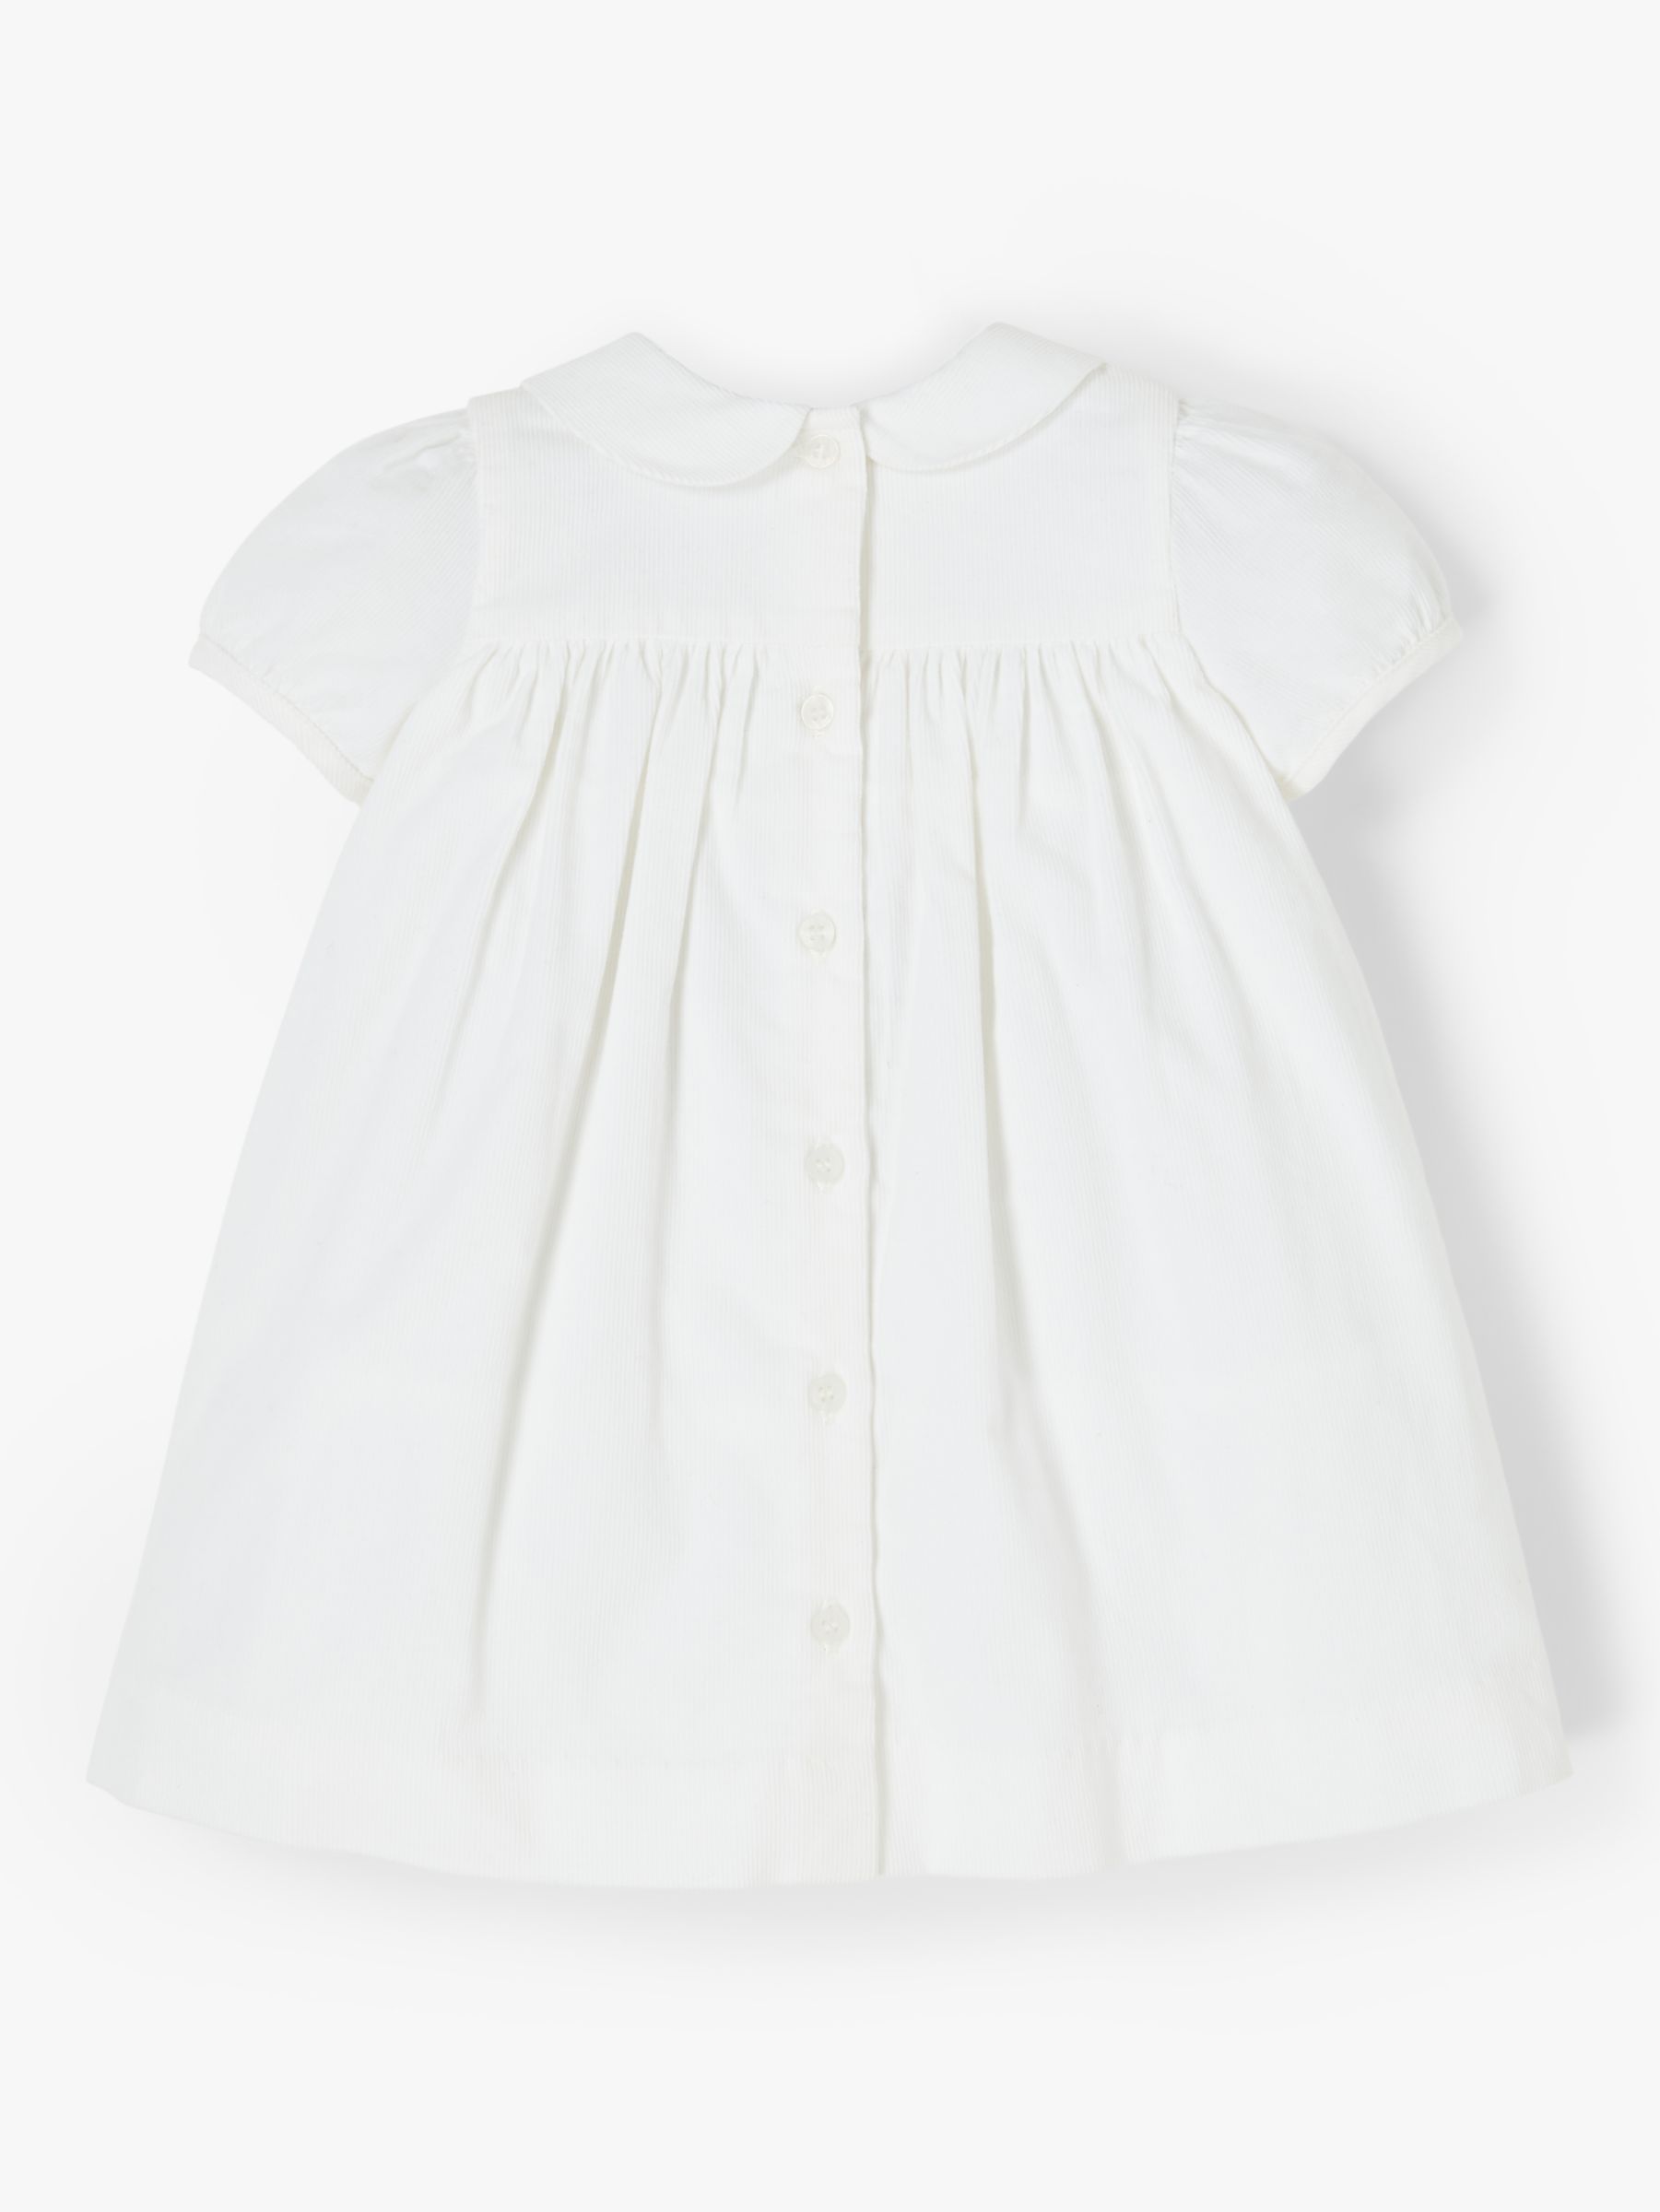 John Lewis Heirloom Collection Baby Cord Dress, White, 9-12 months